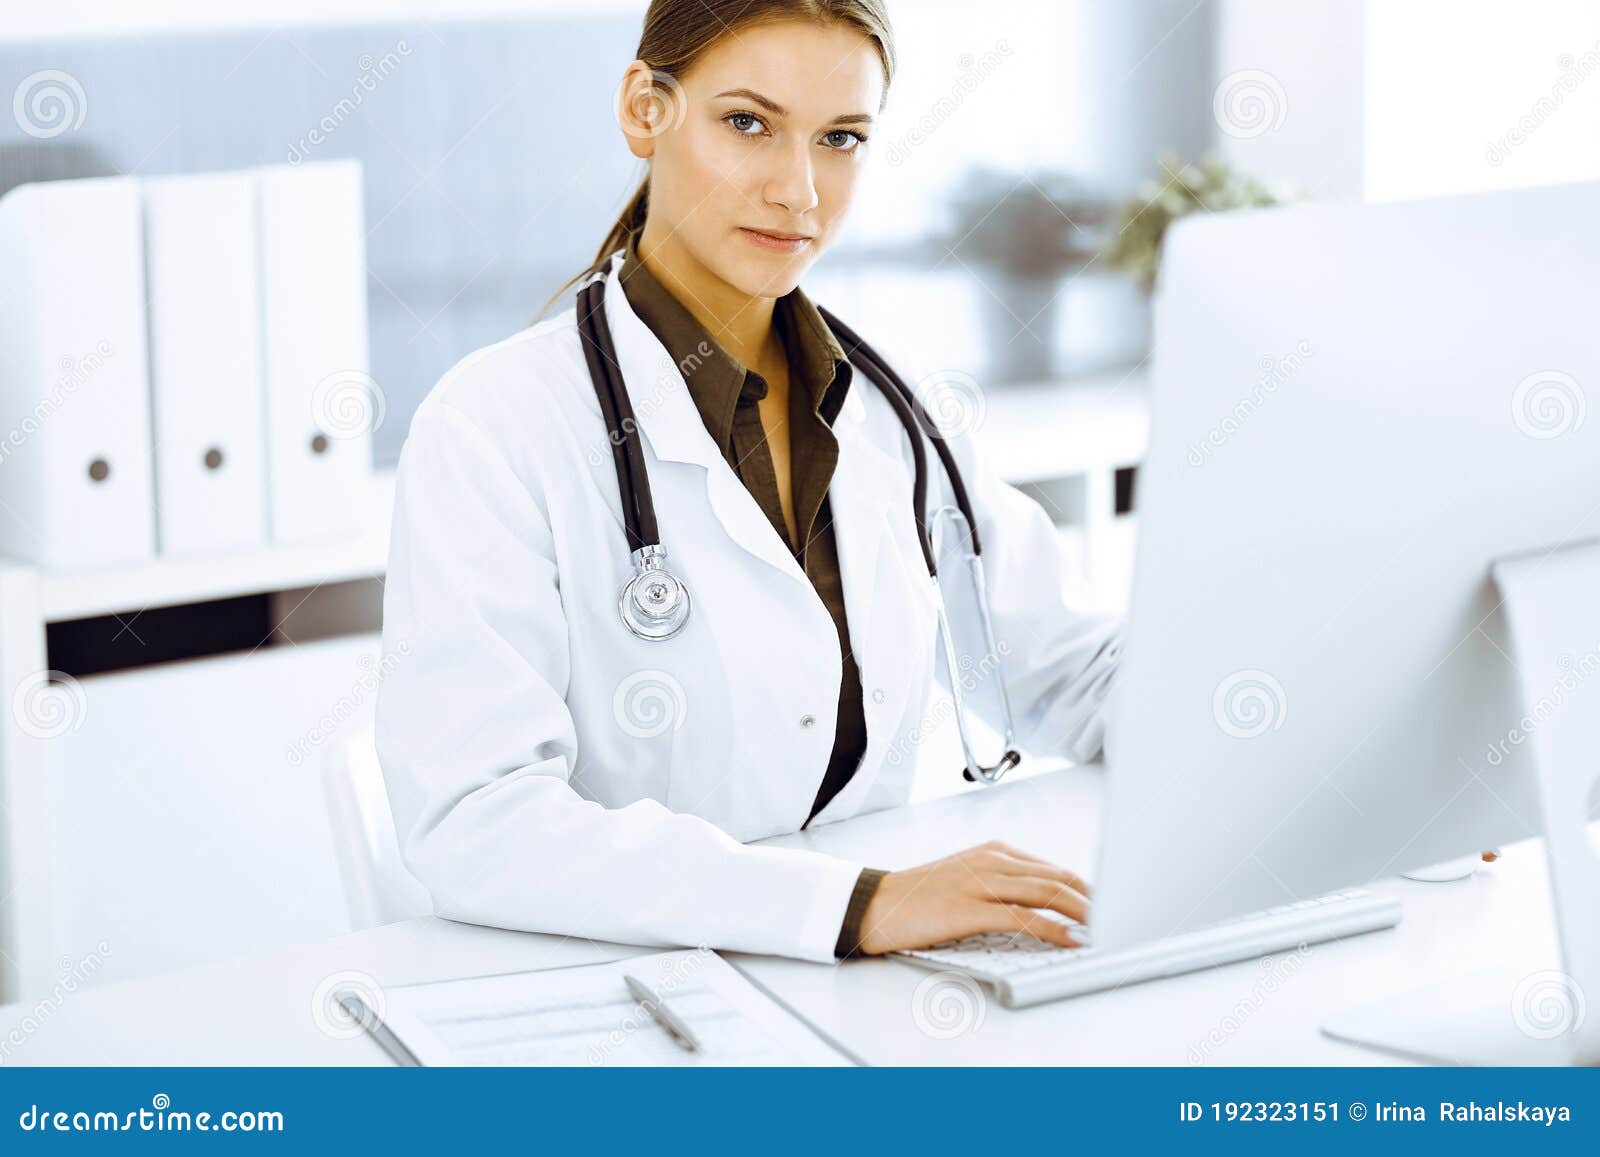 woman-doctor typing on pc computer while sitting at the desk in hospital office. physician at work